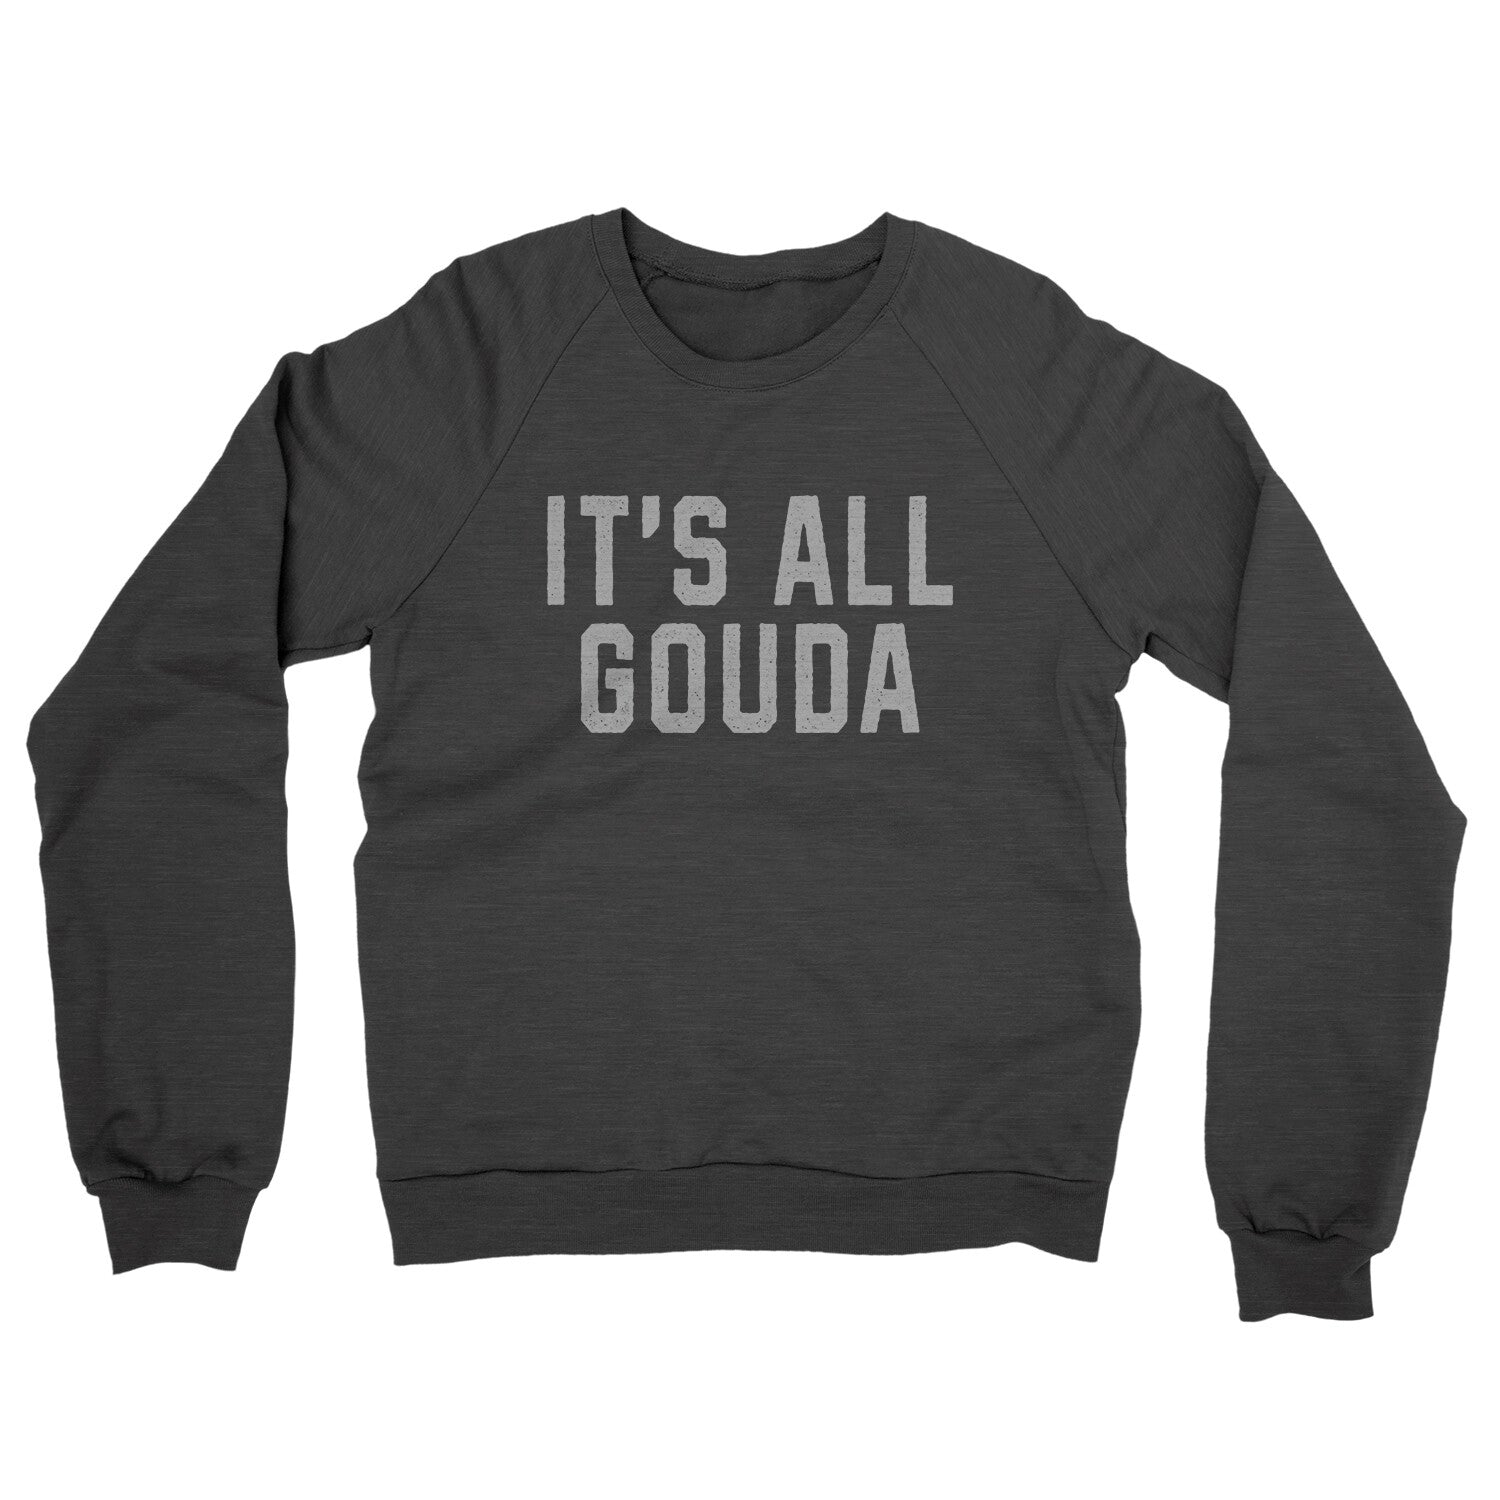 It’s All Gouda in Charcoal Heather Color